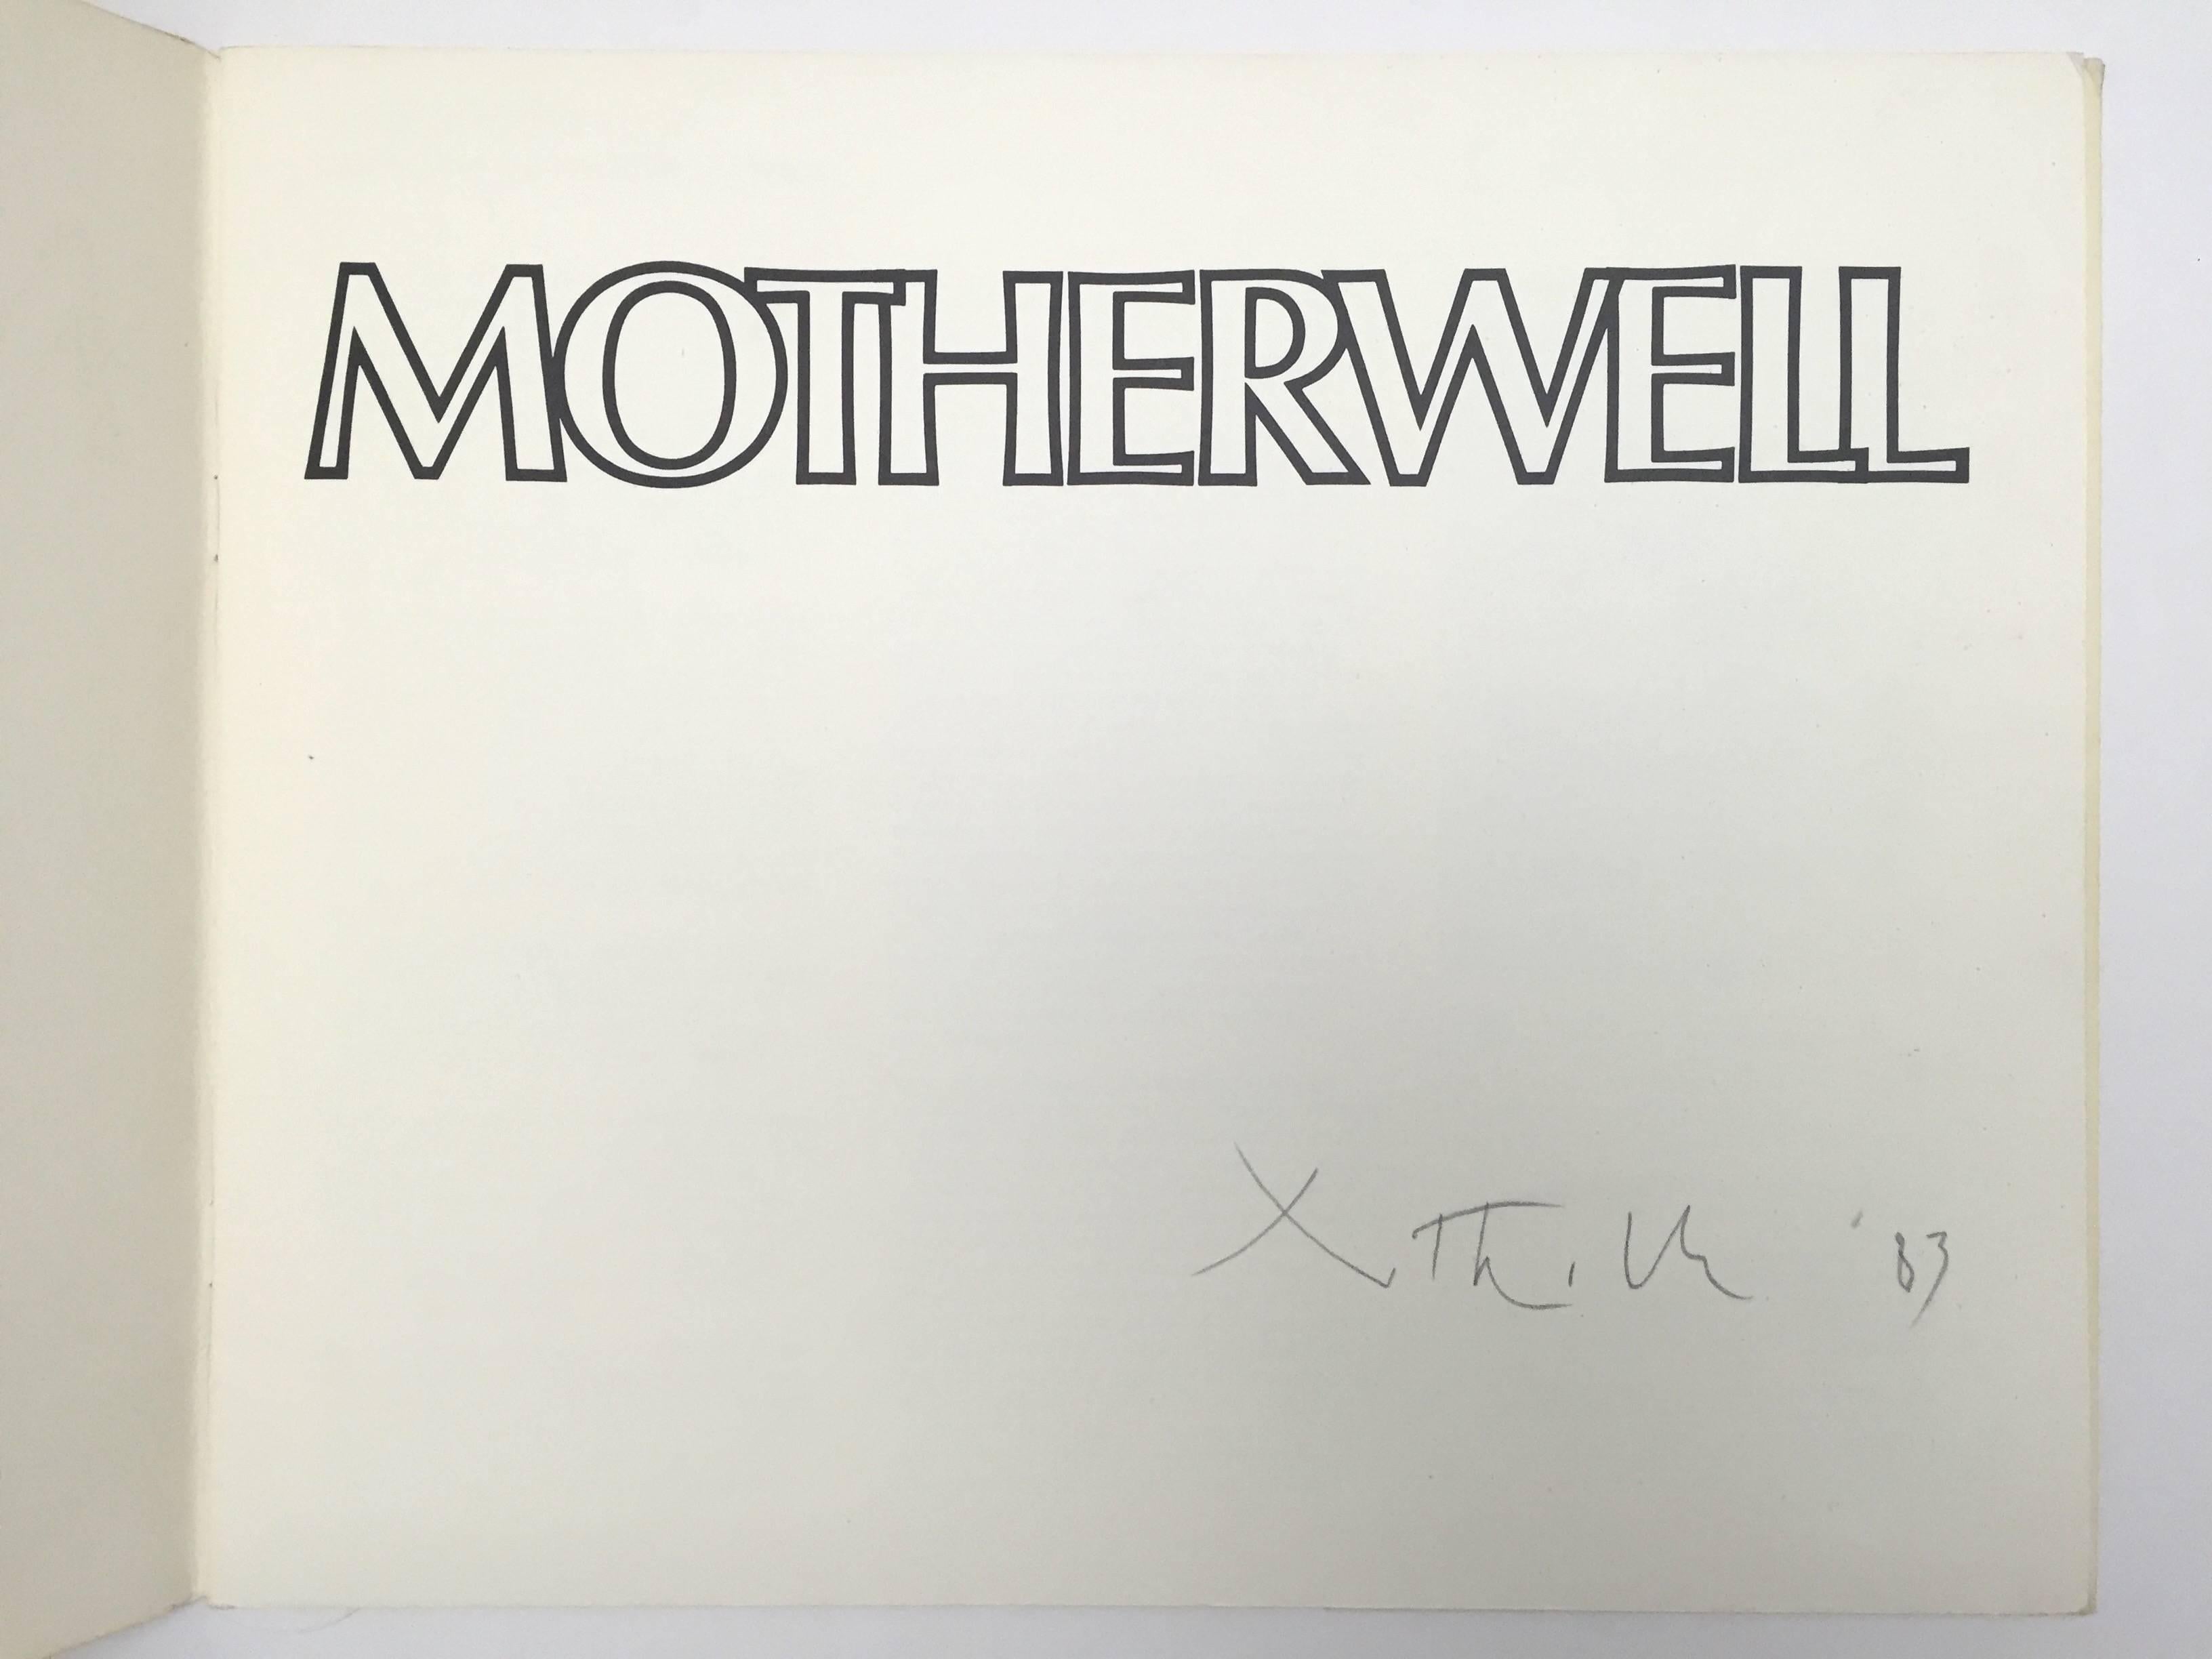 First edition from an edition of 4000, published by Brooke Alexander, 1975. Untitled 1974. Lithograph with collage printed on Rives B.F.K. parer 10 x 24 inches

This rare catalogue signed and dated Motherwell 83. Produced for an exhibition at Jack